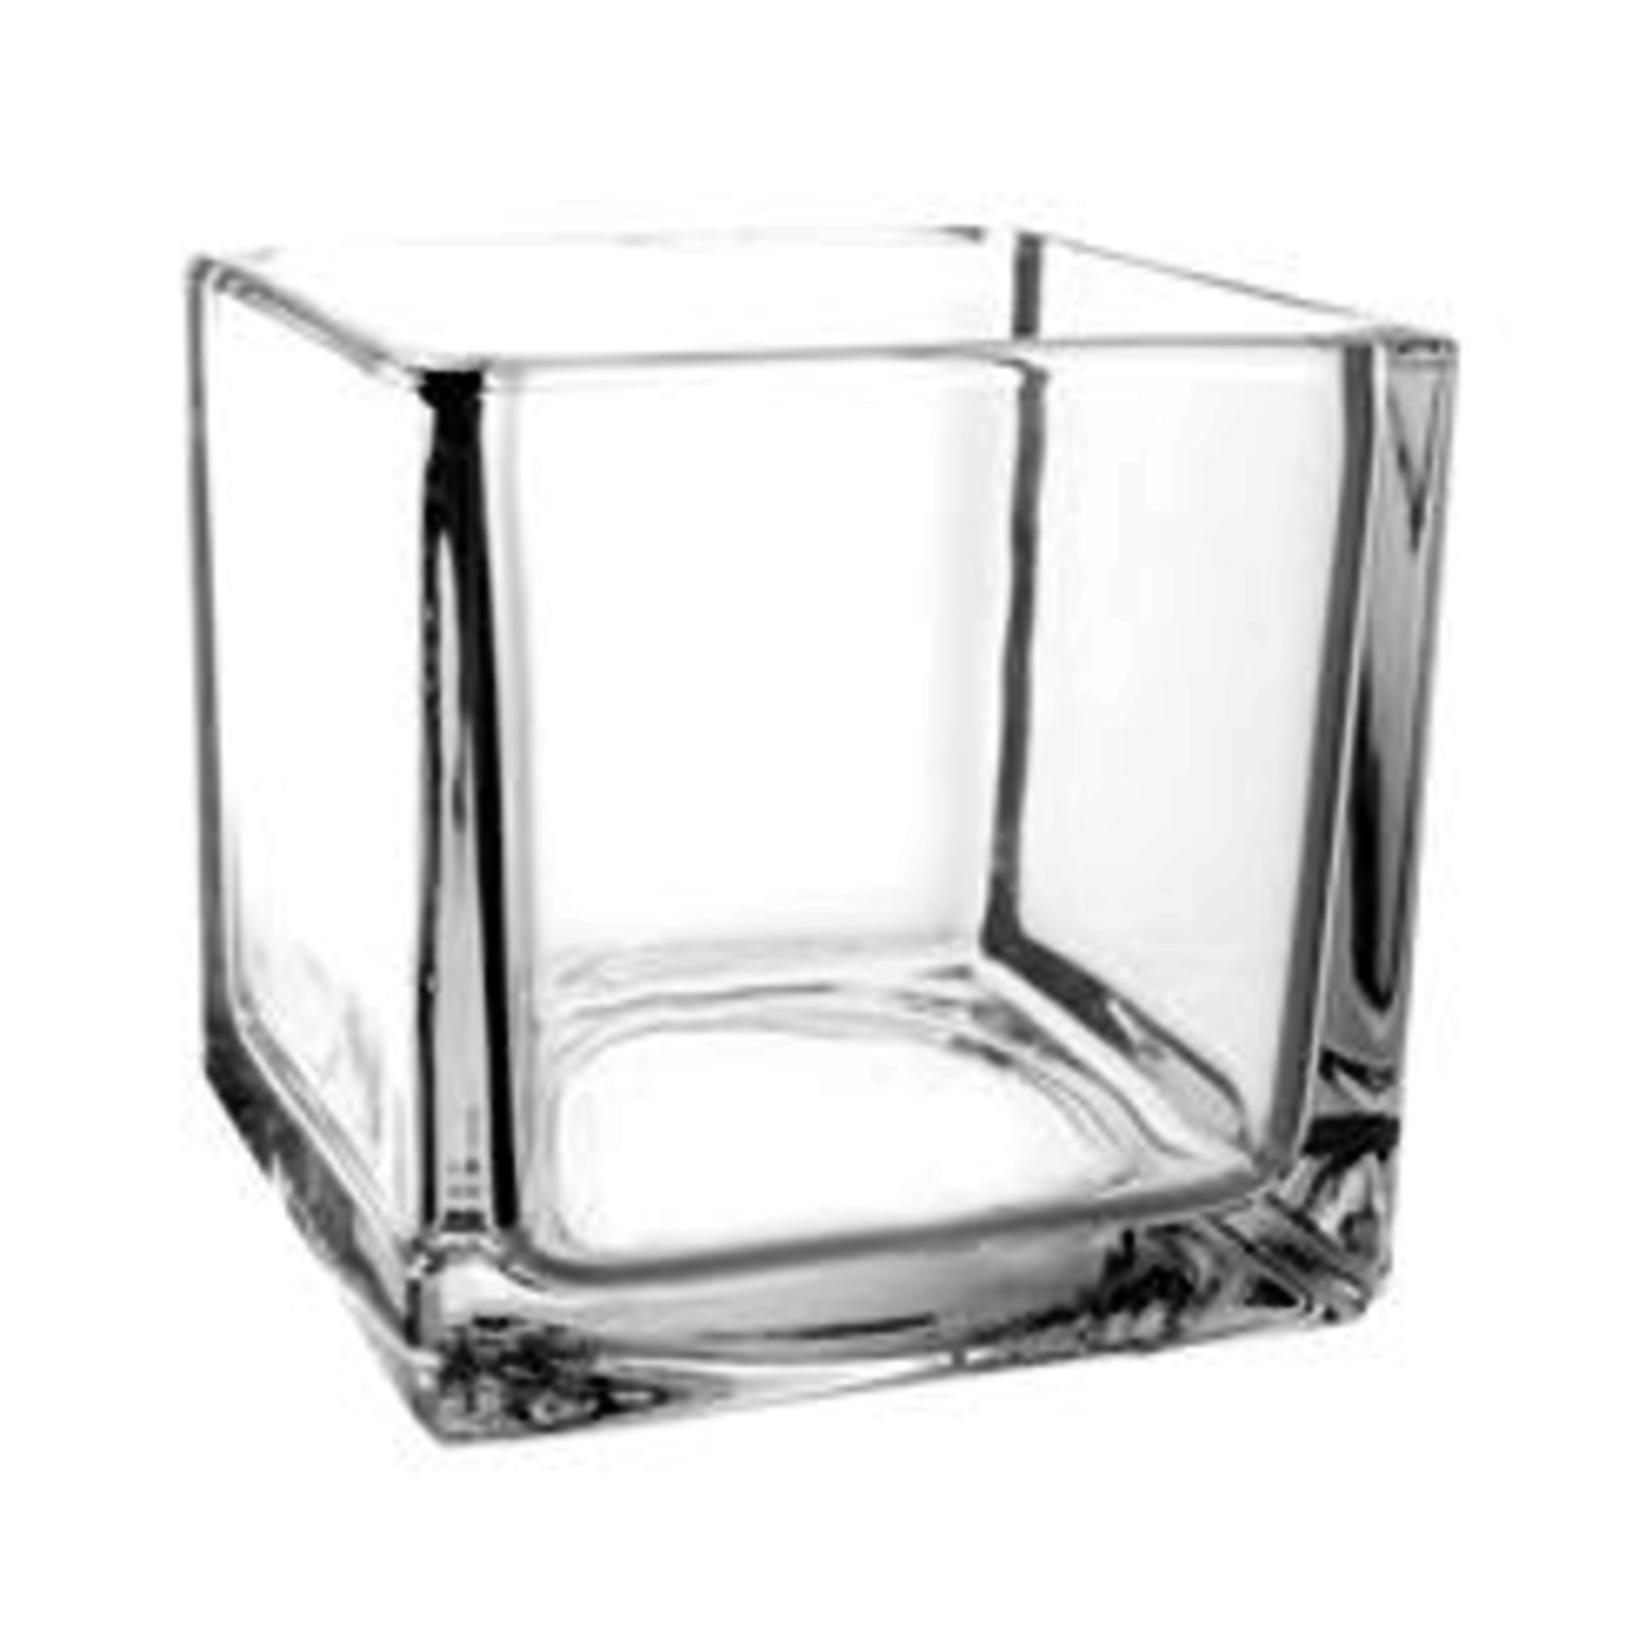 5"H X 5" X 5" CLEAR GLASS CUBE SQUARE VASE